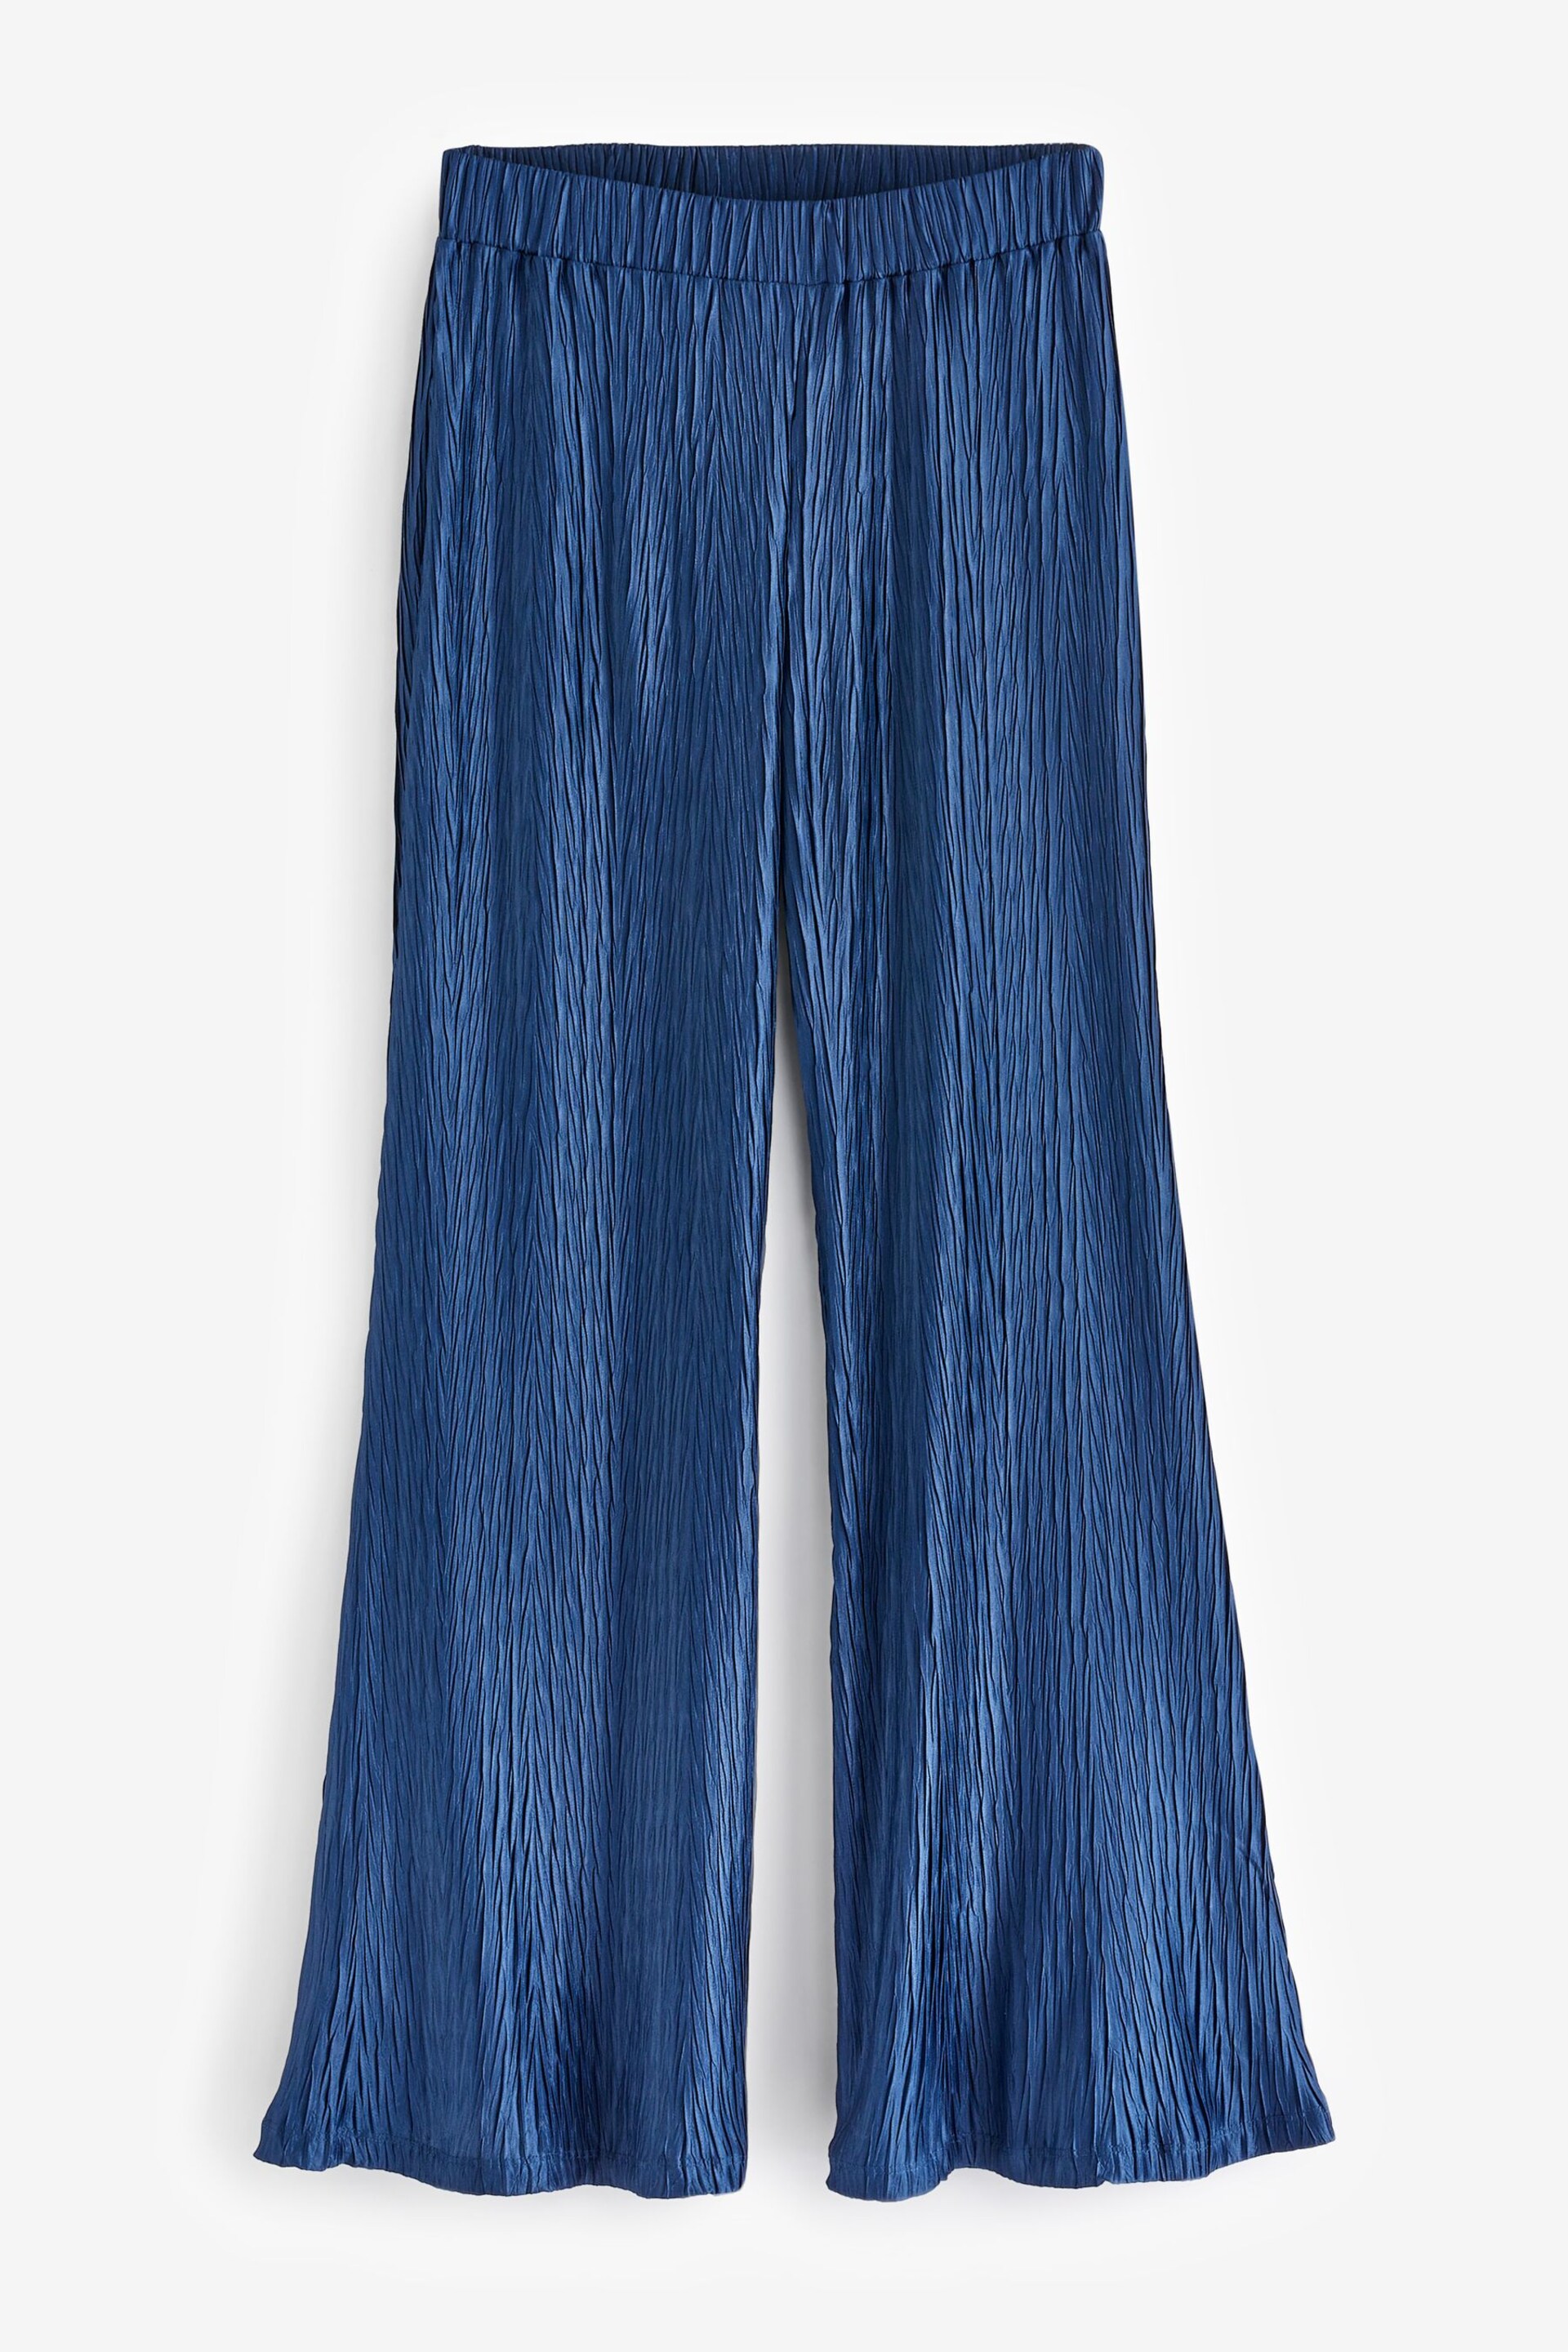 French Connection Scarlette Trousers - Image 5 of 5